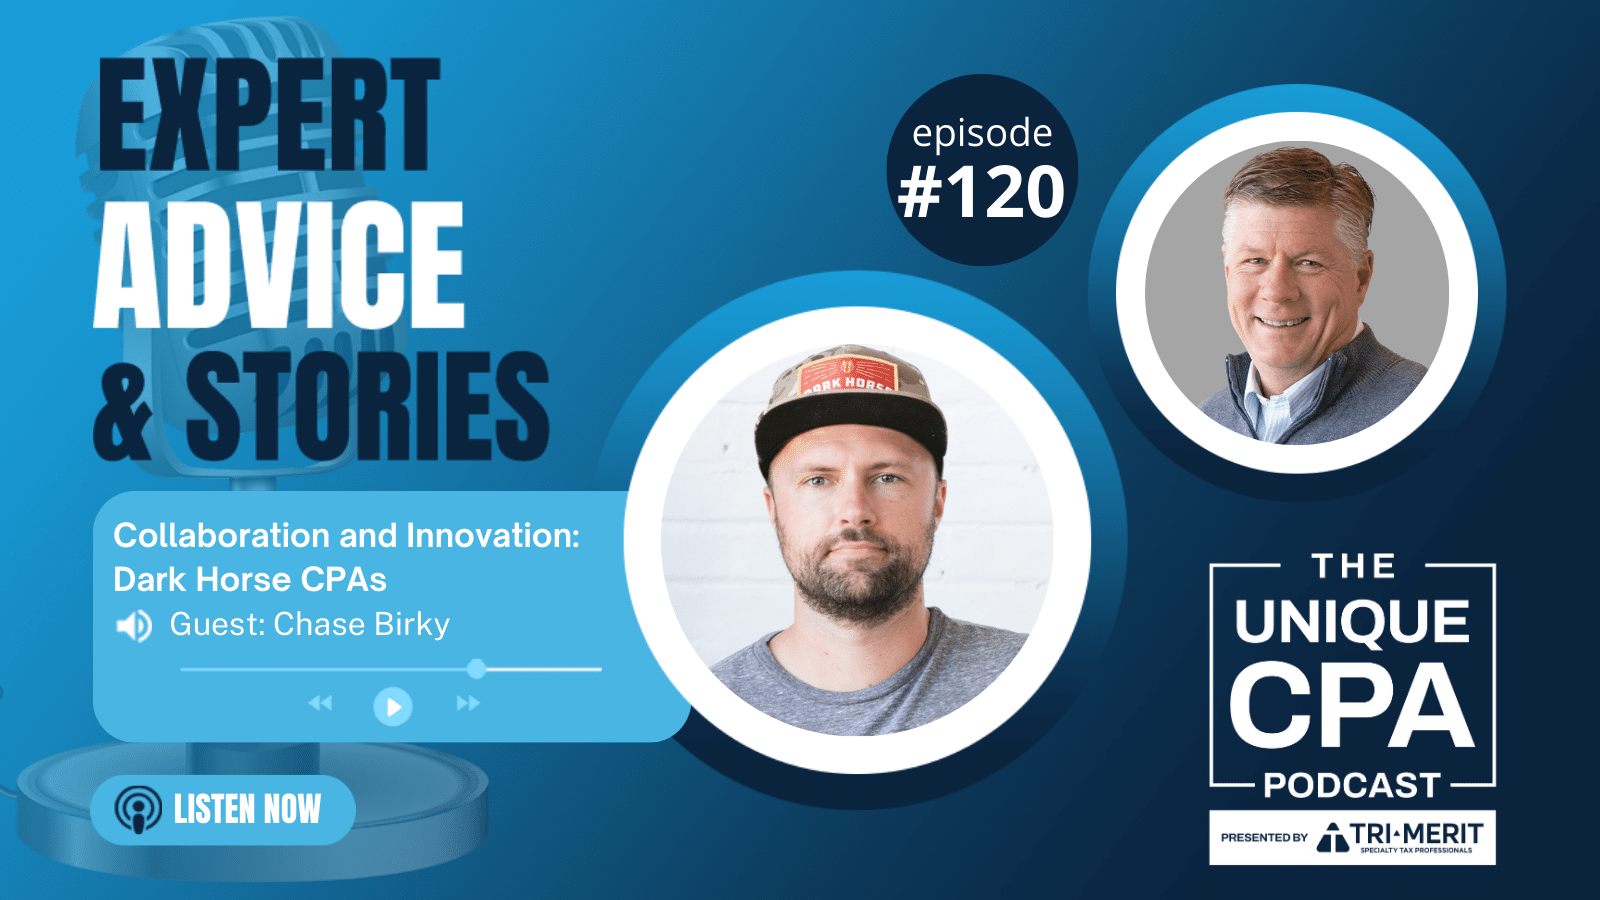 Unique Cpa Featured Image Ep 120 Chase Birky - Collaboration And Innovation - Tri-Merit